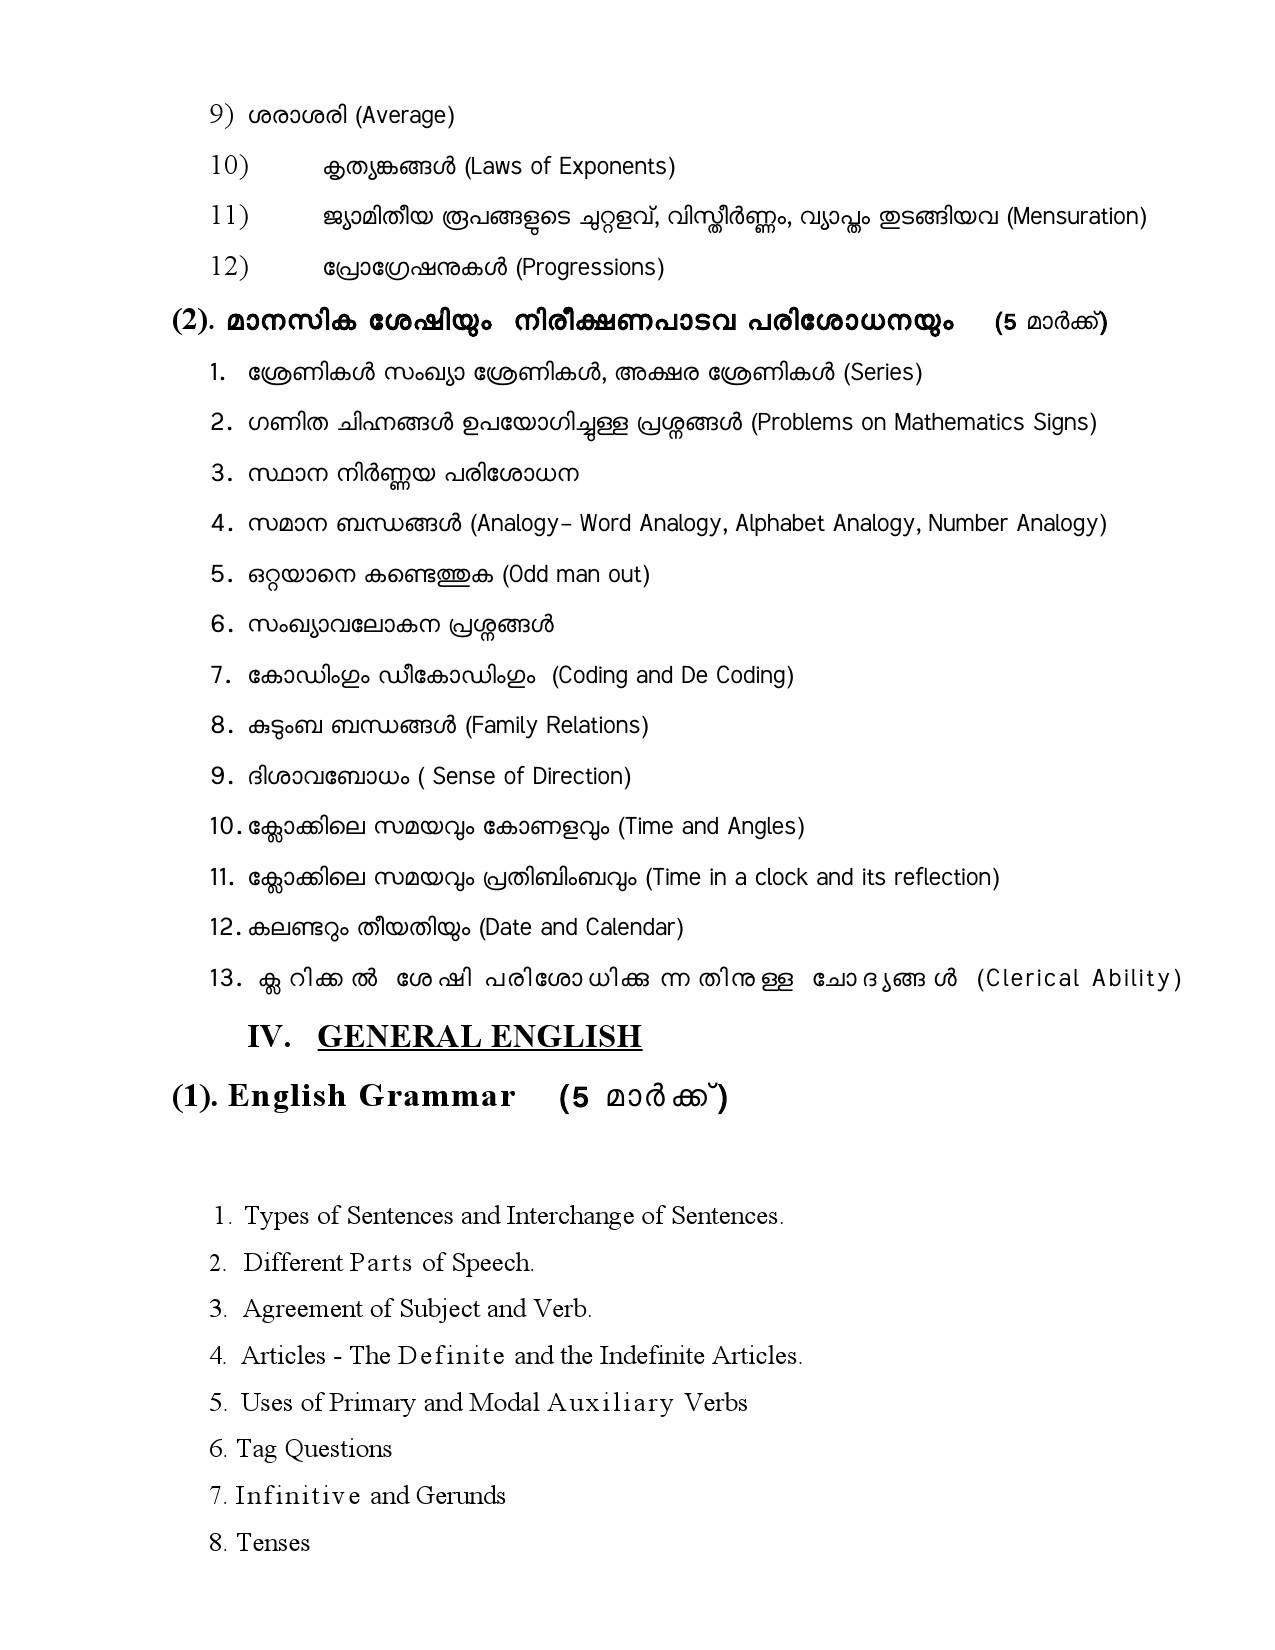 Civil Police Officer Final Examination Syllabus For Plus Two Level - Notification Image 8